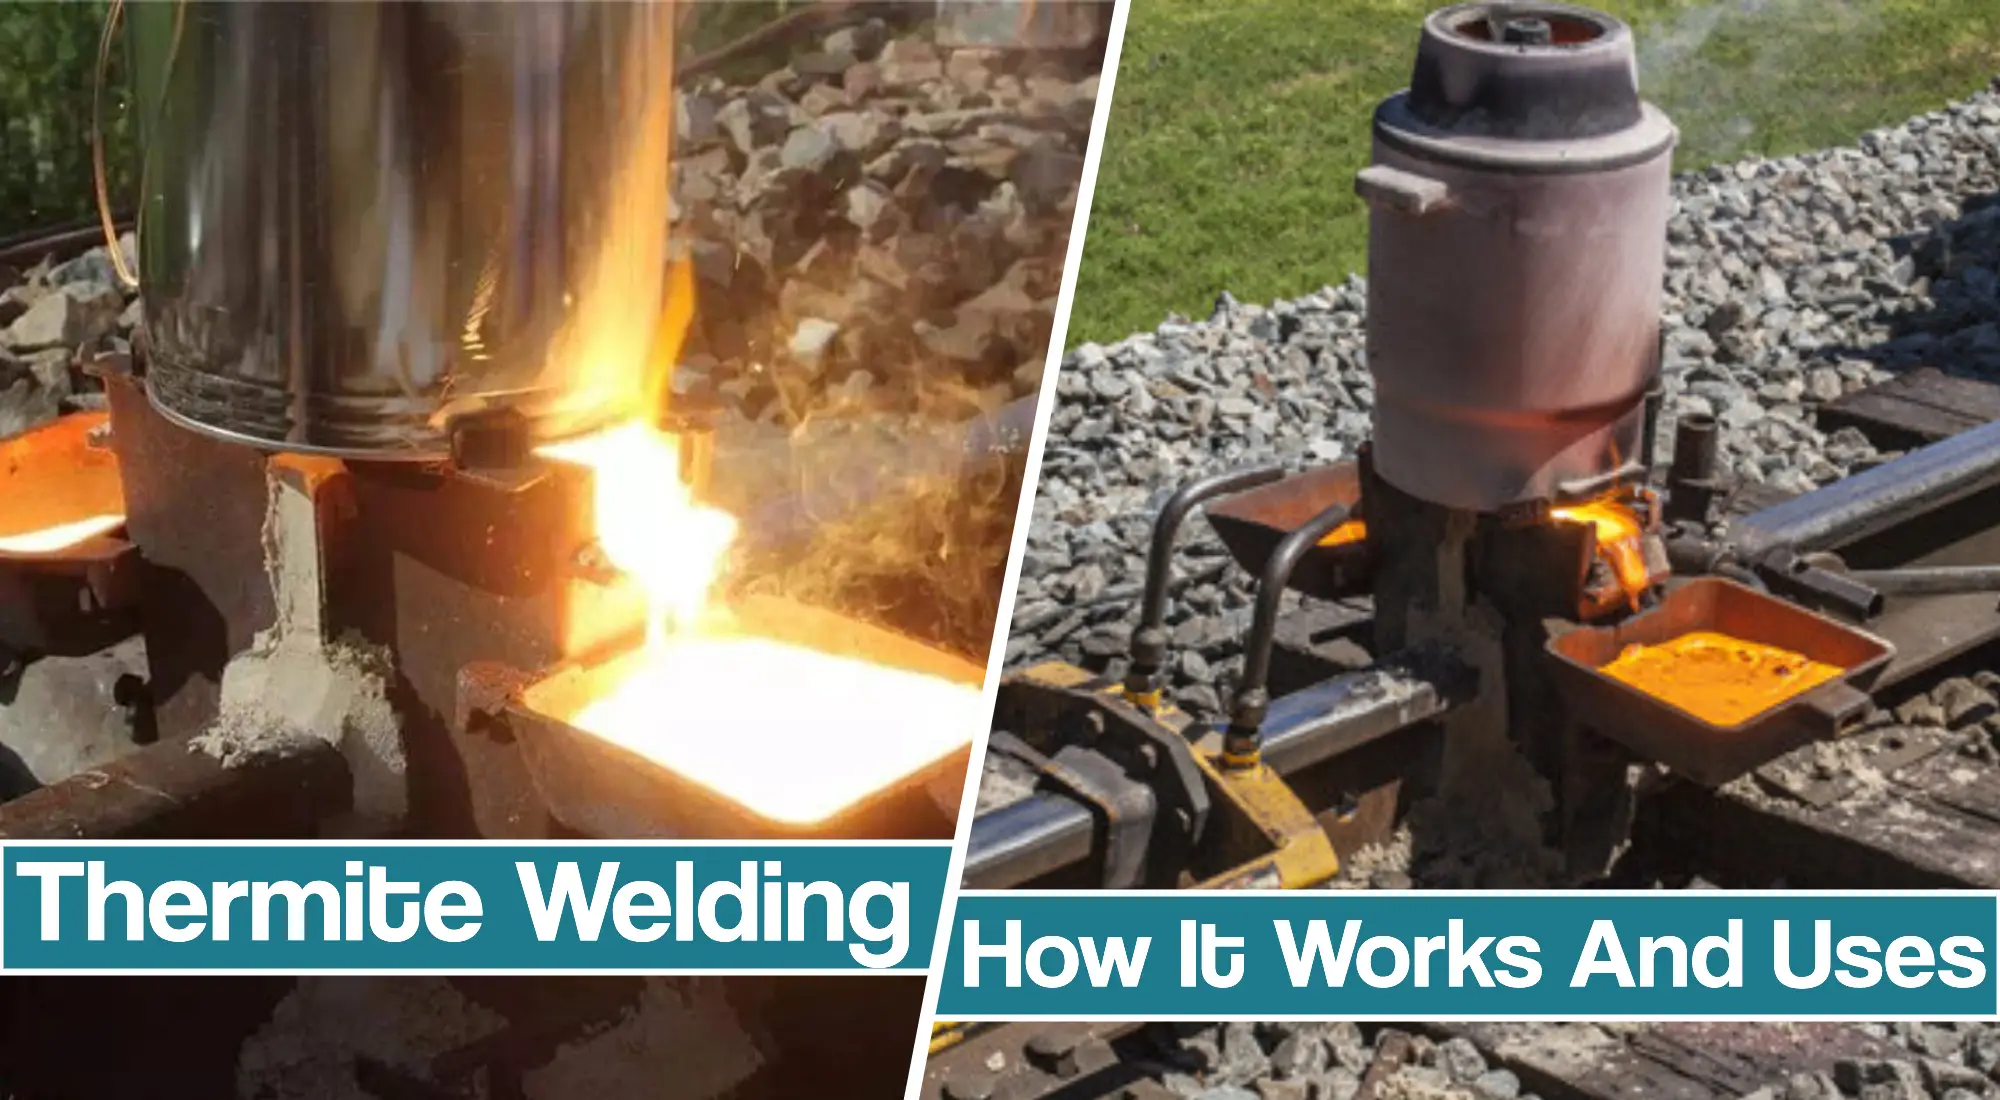 Thermite welding Process, Equipment And Reaction